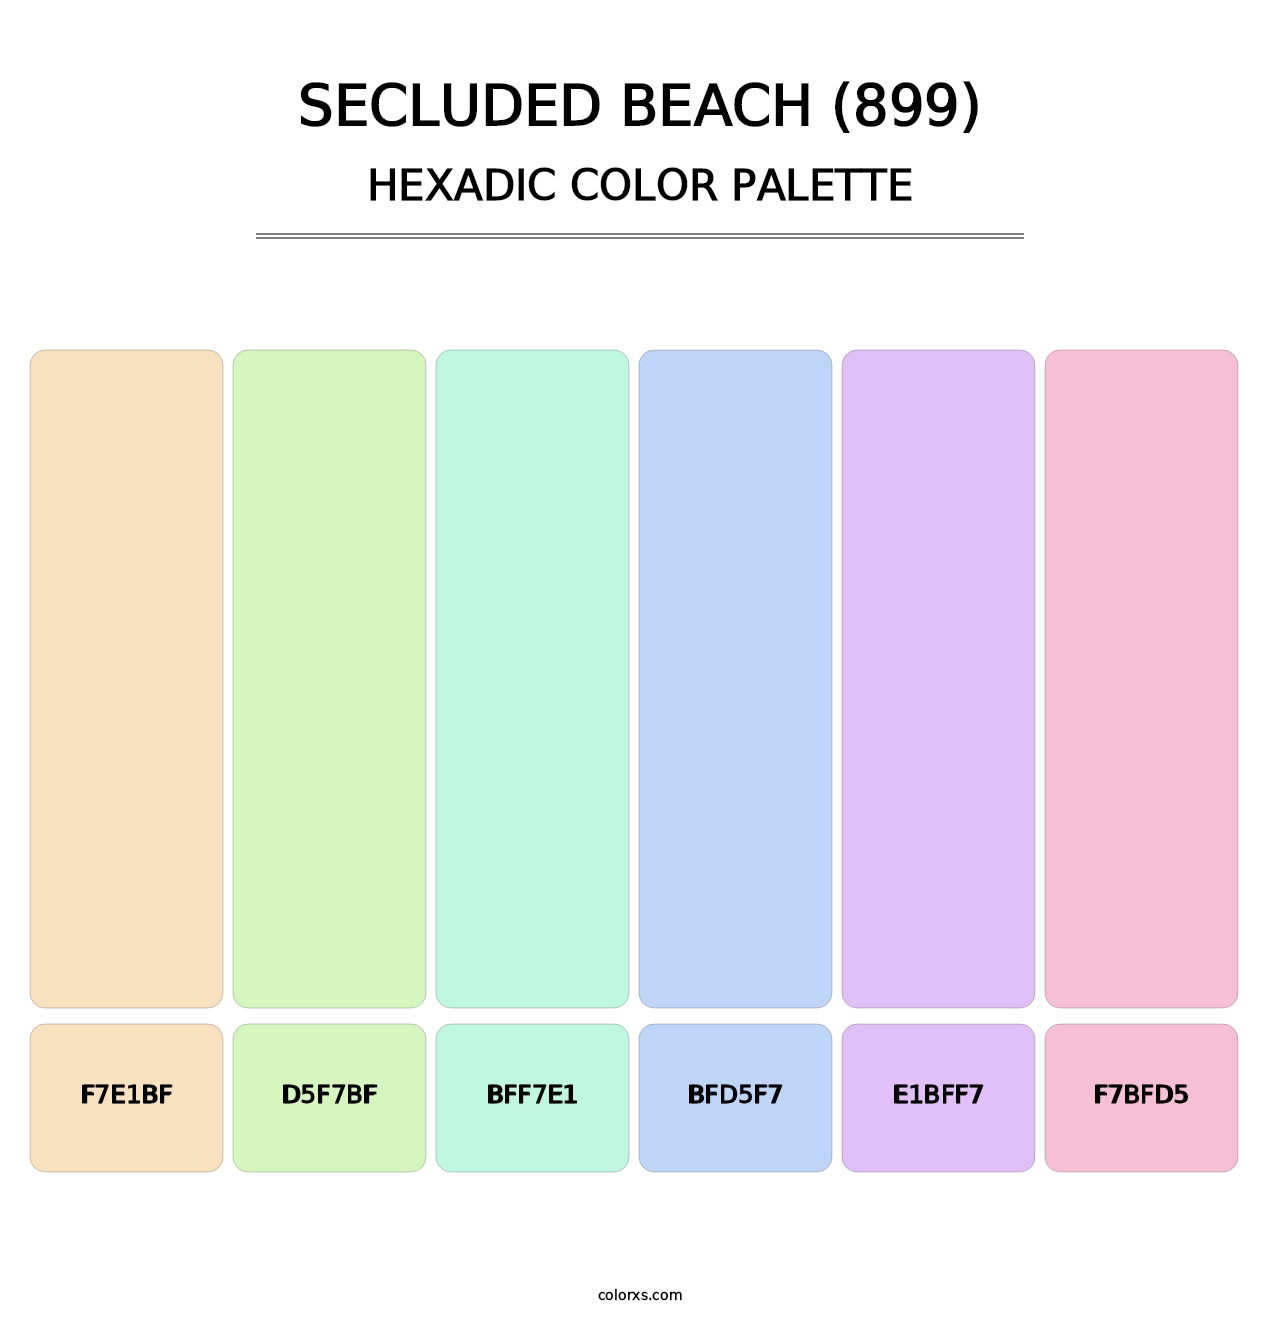 Secluded Beach (899) - Hexadic Color Palette